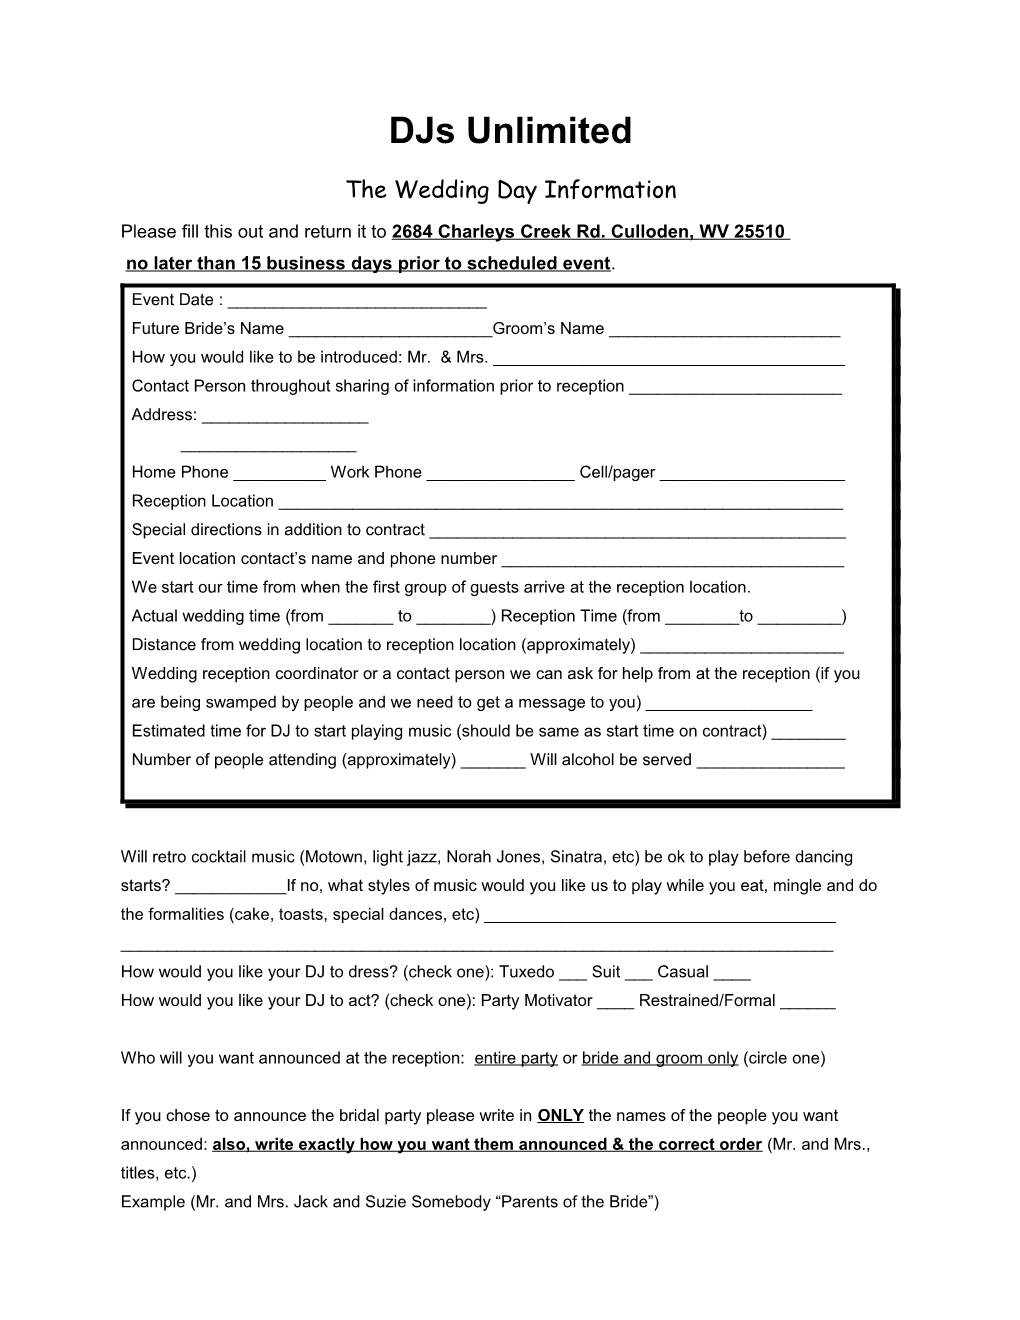 The Wedding Day Information